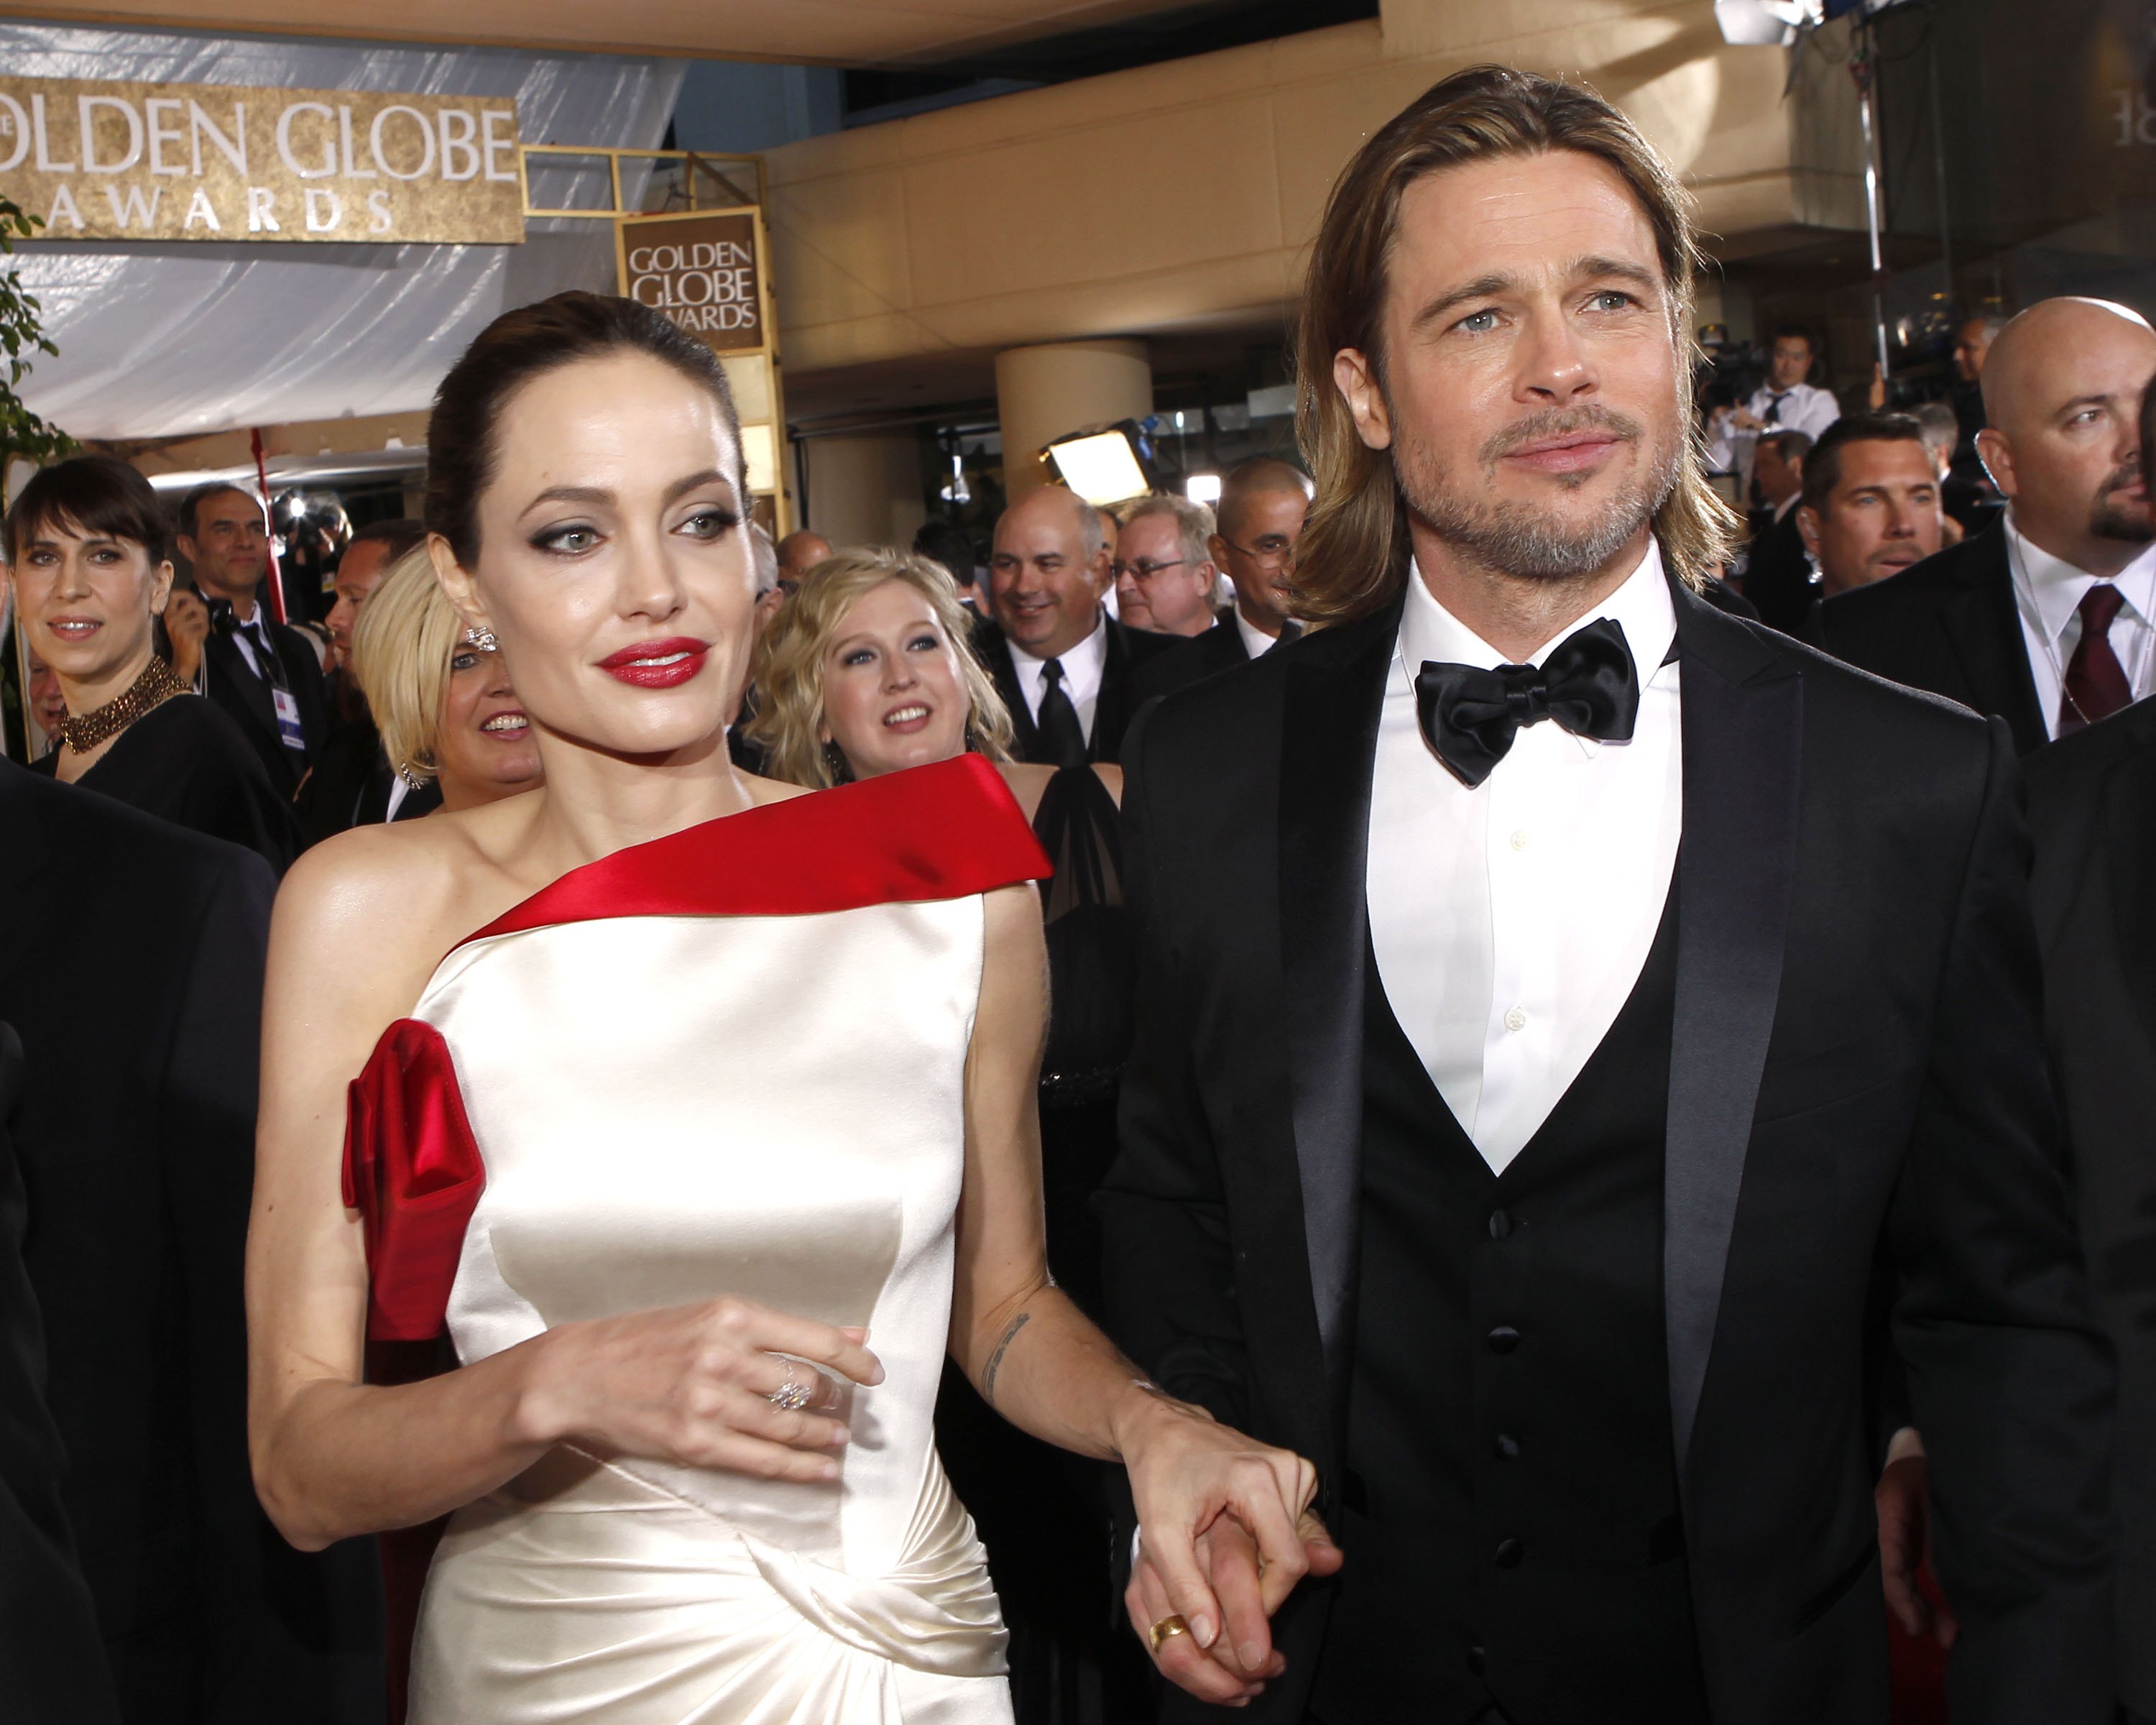 Angelina Jolie and Brad Pitt arrive at the 69th Annual Golden Globe Awards held at the Beverly Hilton Hotel on January 15, 2012. | Source: Getty Images